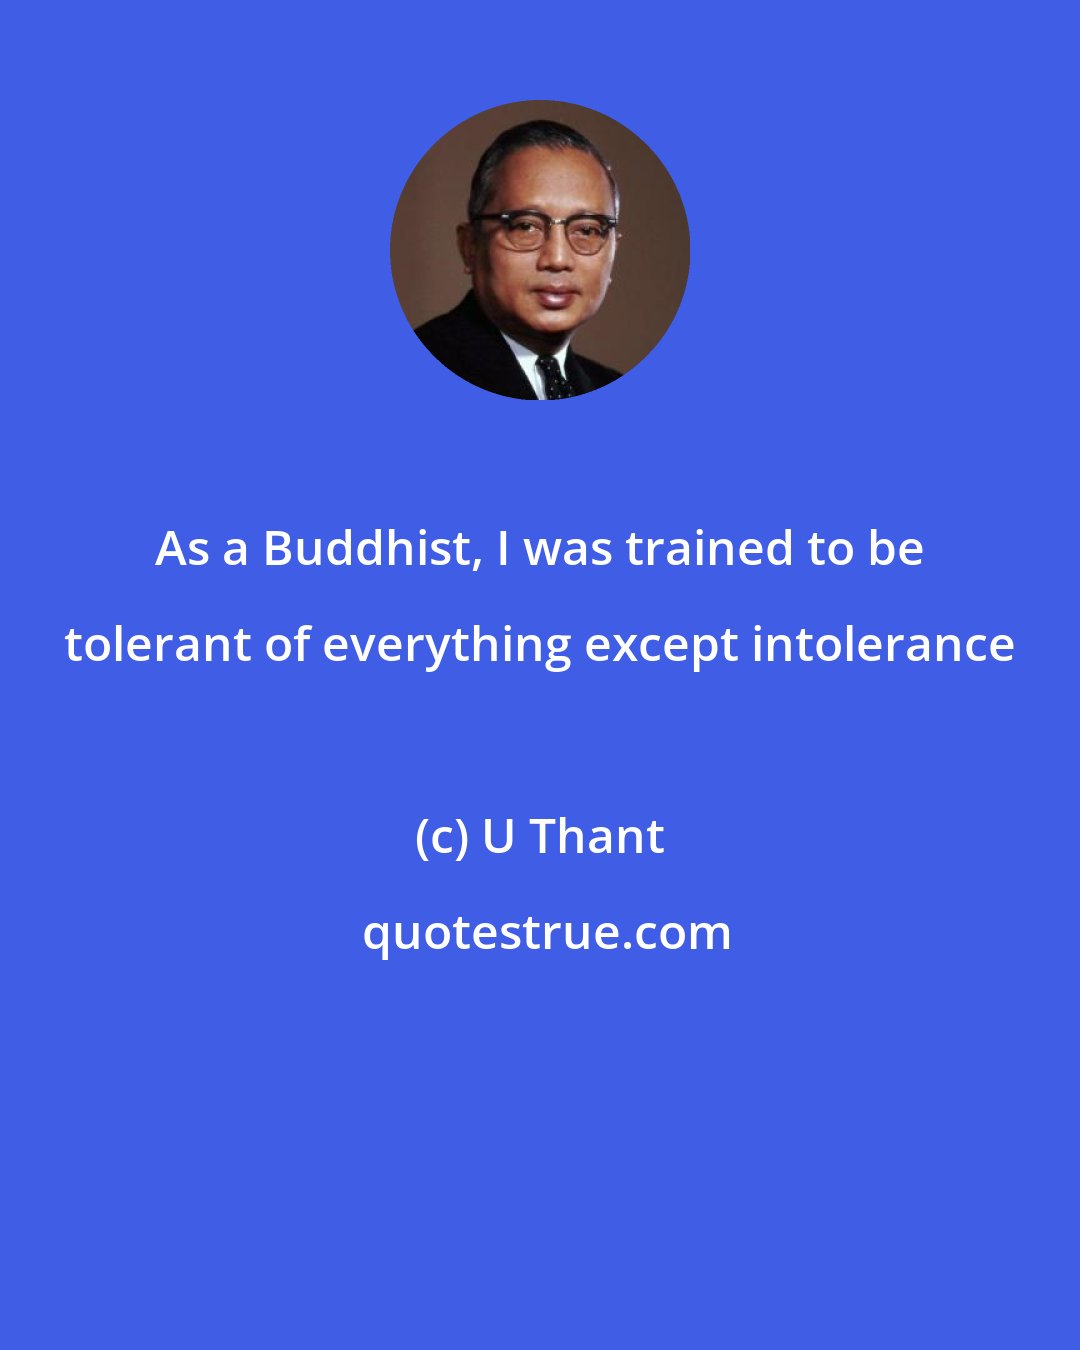 U Thant: As a Buddhist, I was trained to be tolerant of everything except intolerance